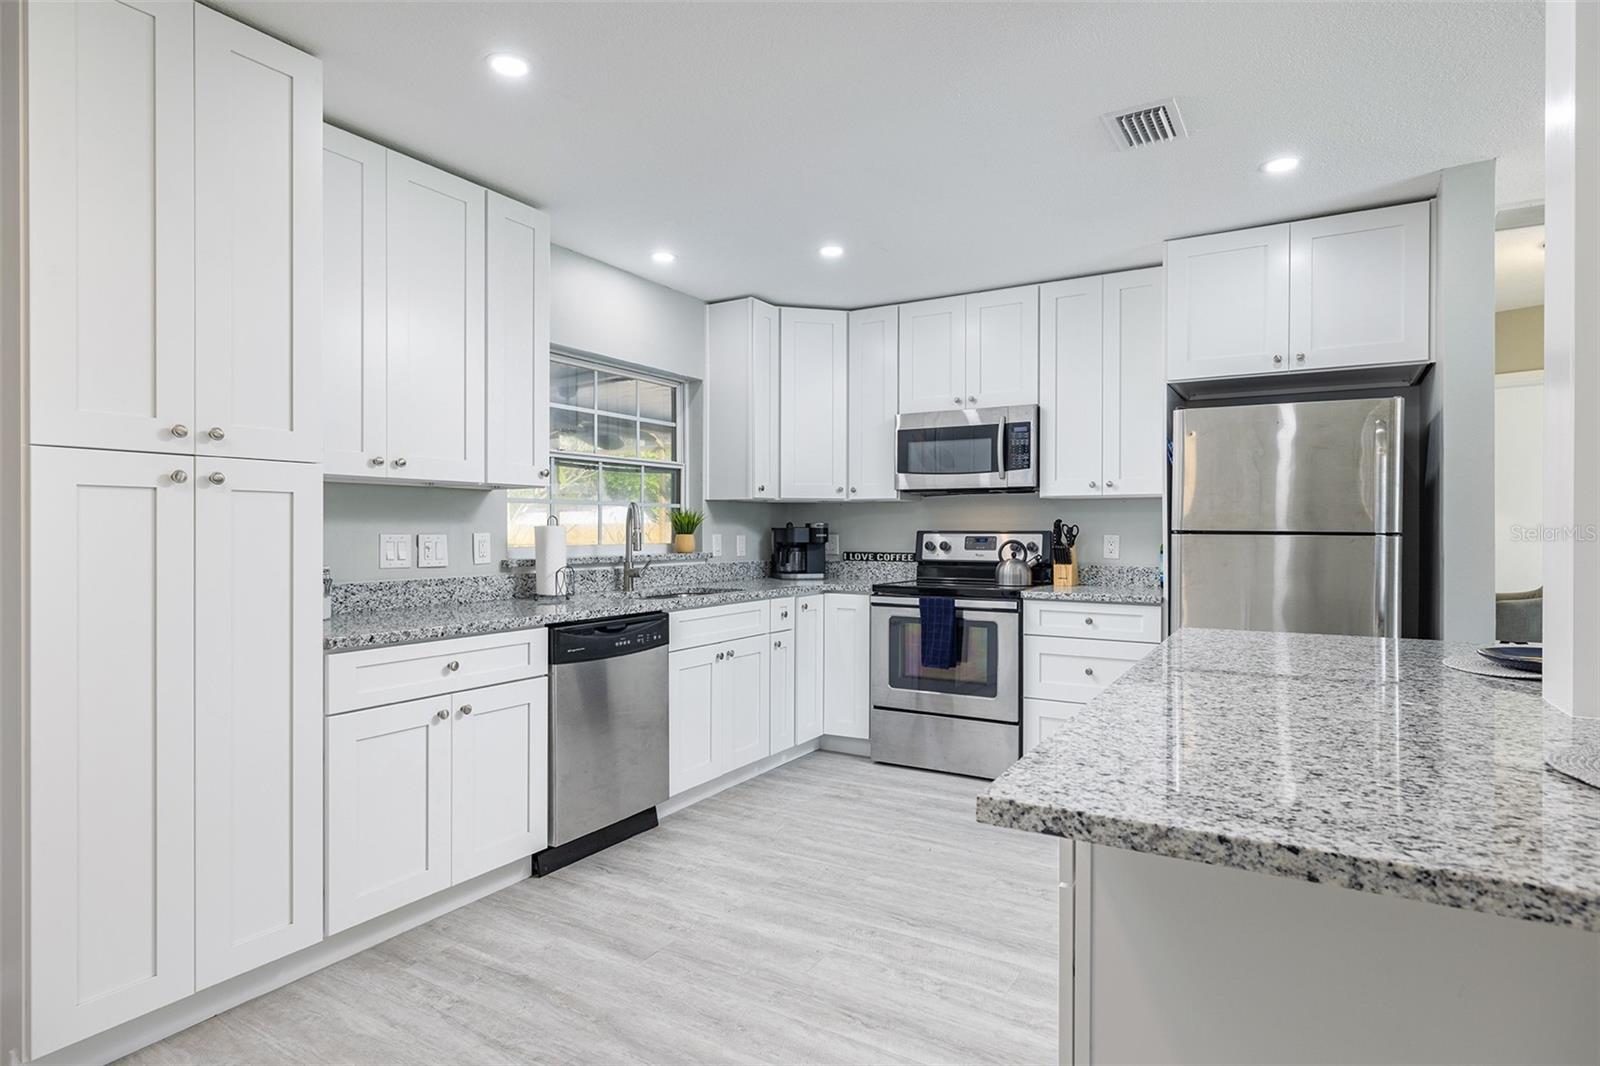 Modern Kitchen with shaker cabinets, granite counter tops, and stainless steel appliances